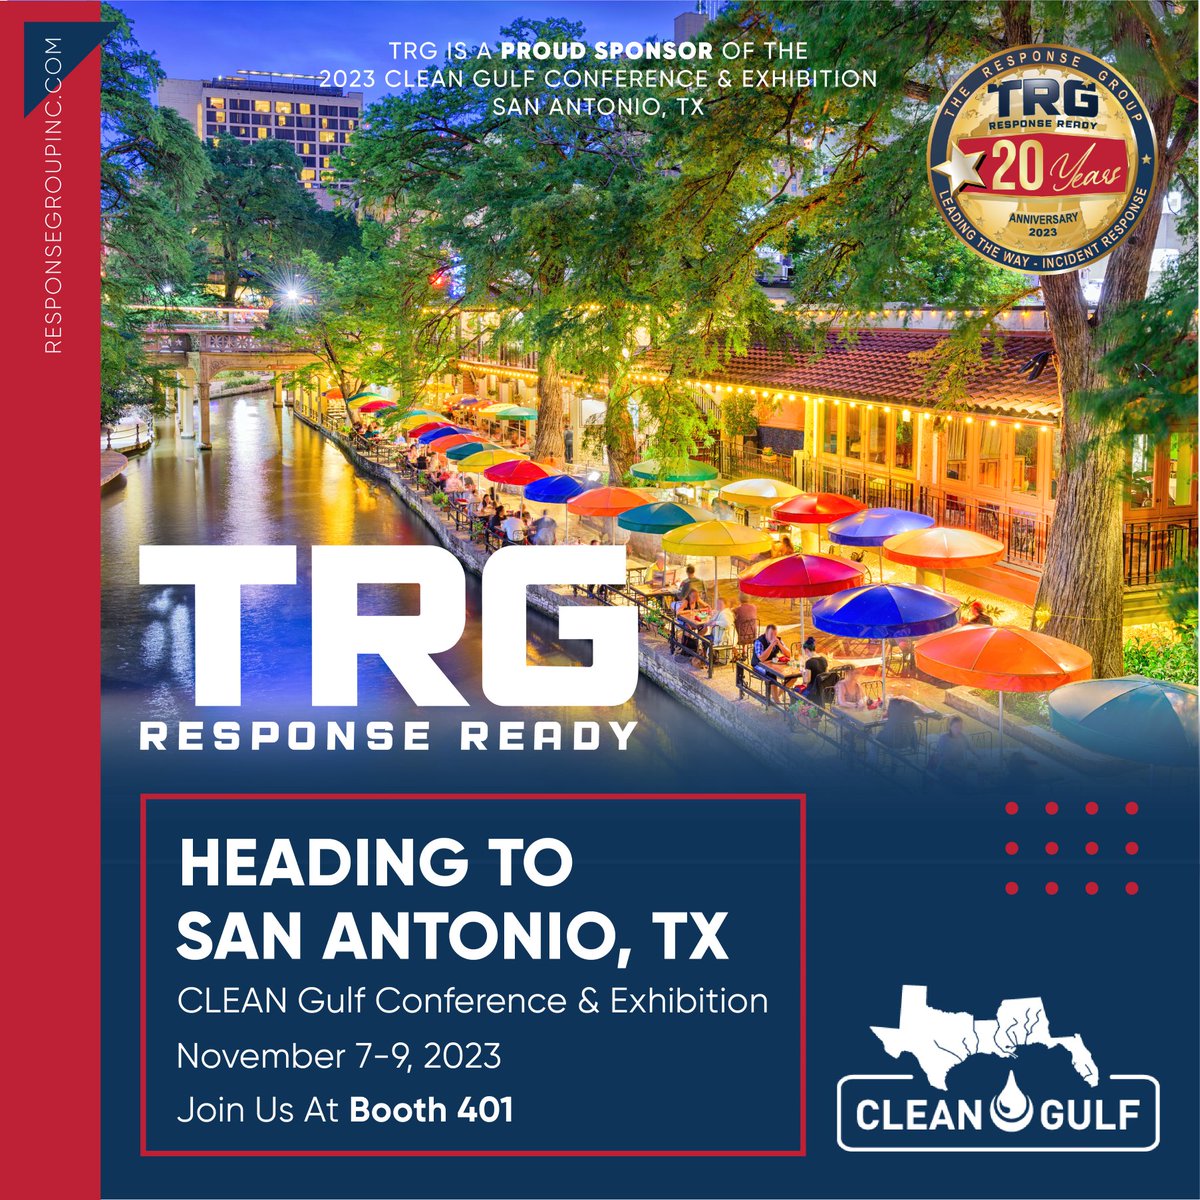 TRG is a proud sponsor of the 2023 Clean Gulf Conference. We  look forward to seeing you there! #oilspillresponse #emergencymanagement #crisismanagement #preparedness #crisiscommunications #trgresponseready